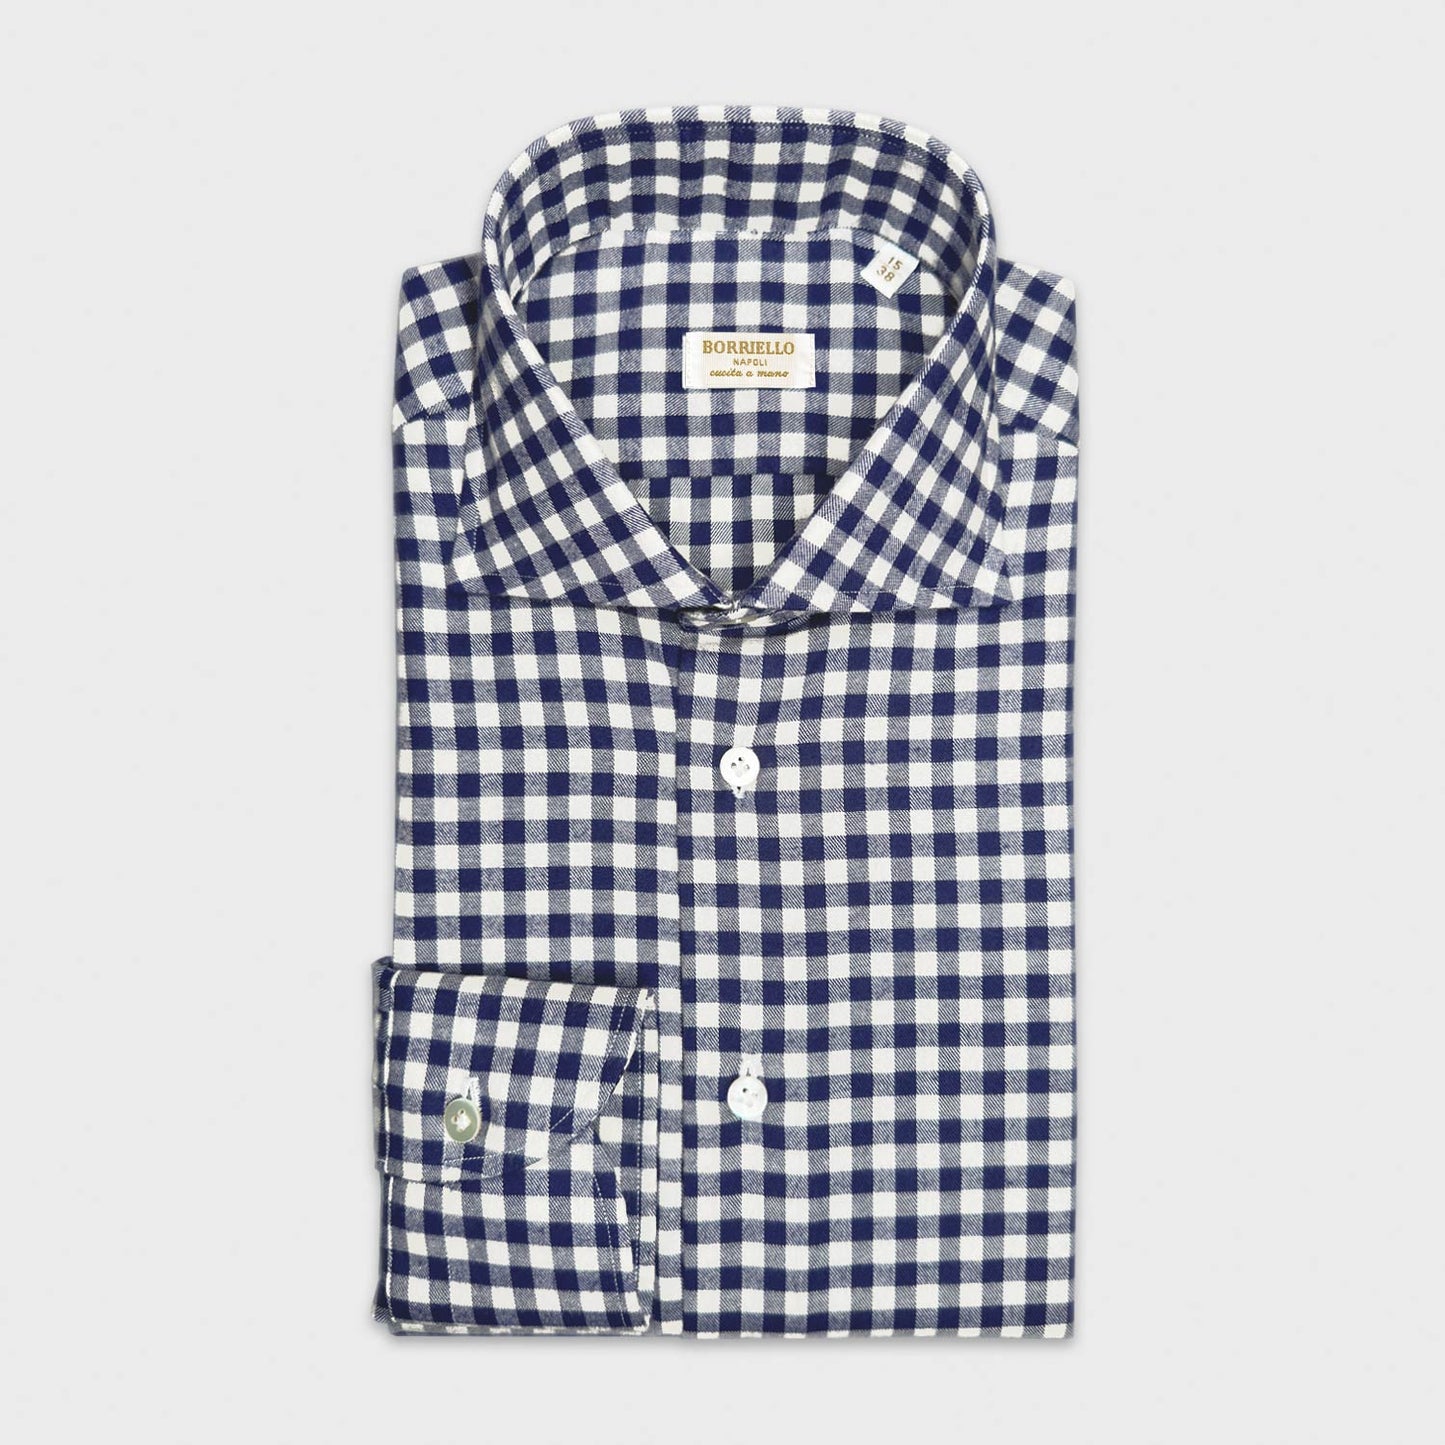 Cobalt Blue Cotton Flannel Checked Shirt Borriello Napoli. Classic checked shirt made with a finest and soft Italian flannel cotton, soft finish and silky touch, comfortable to wear in the middle seasons and in winter in your classic or sporty outfit.